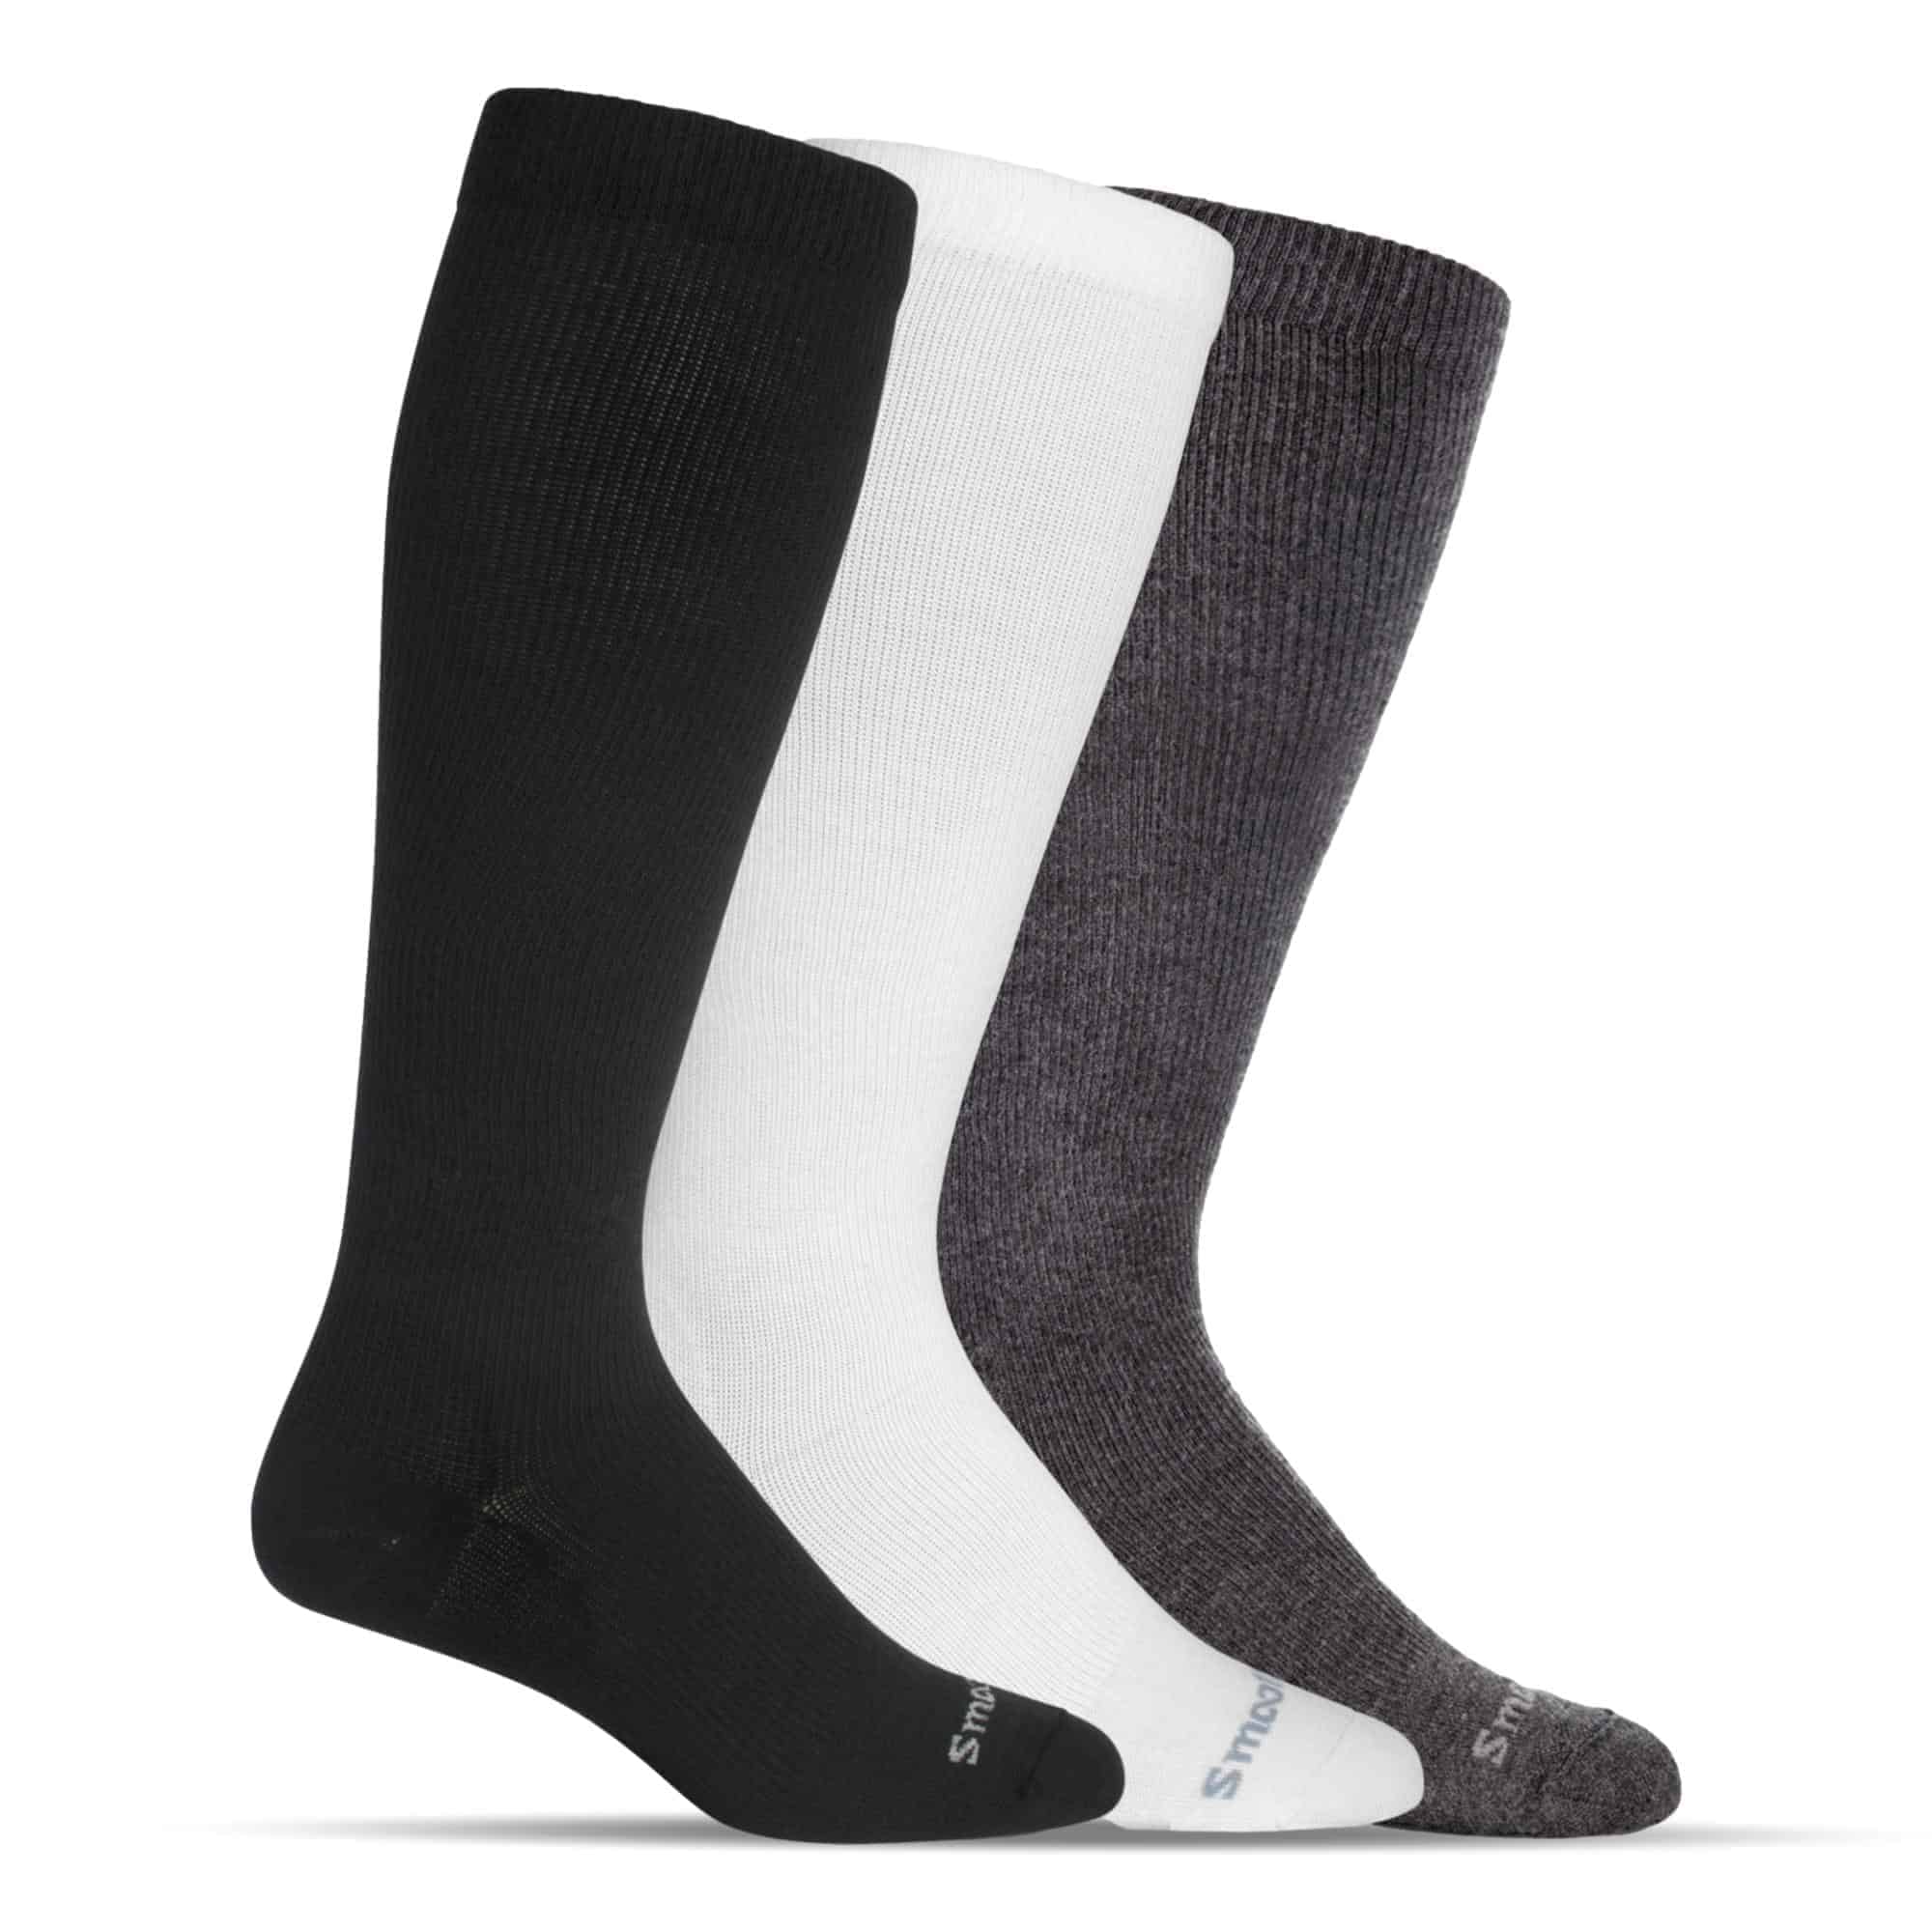 2 Pairs Ladies High Knee Over the Knee Socks Cotton Rich with Lycra Black 4-6.5 